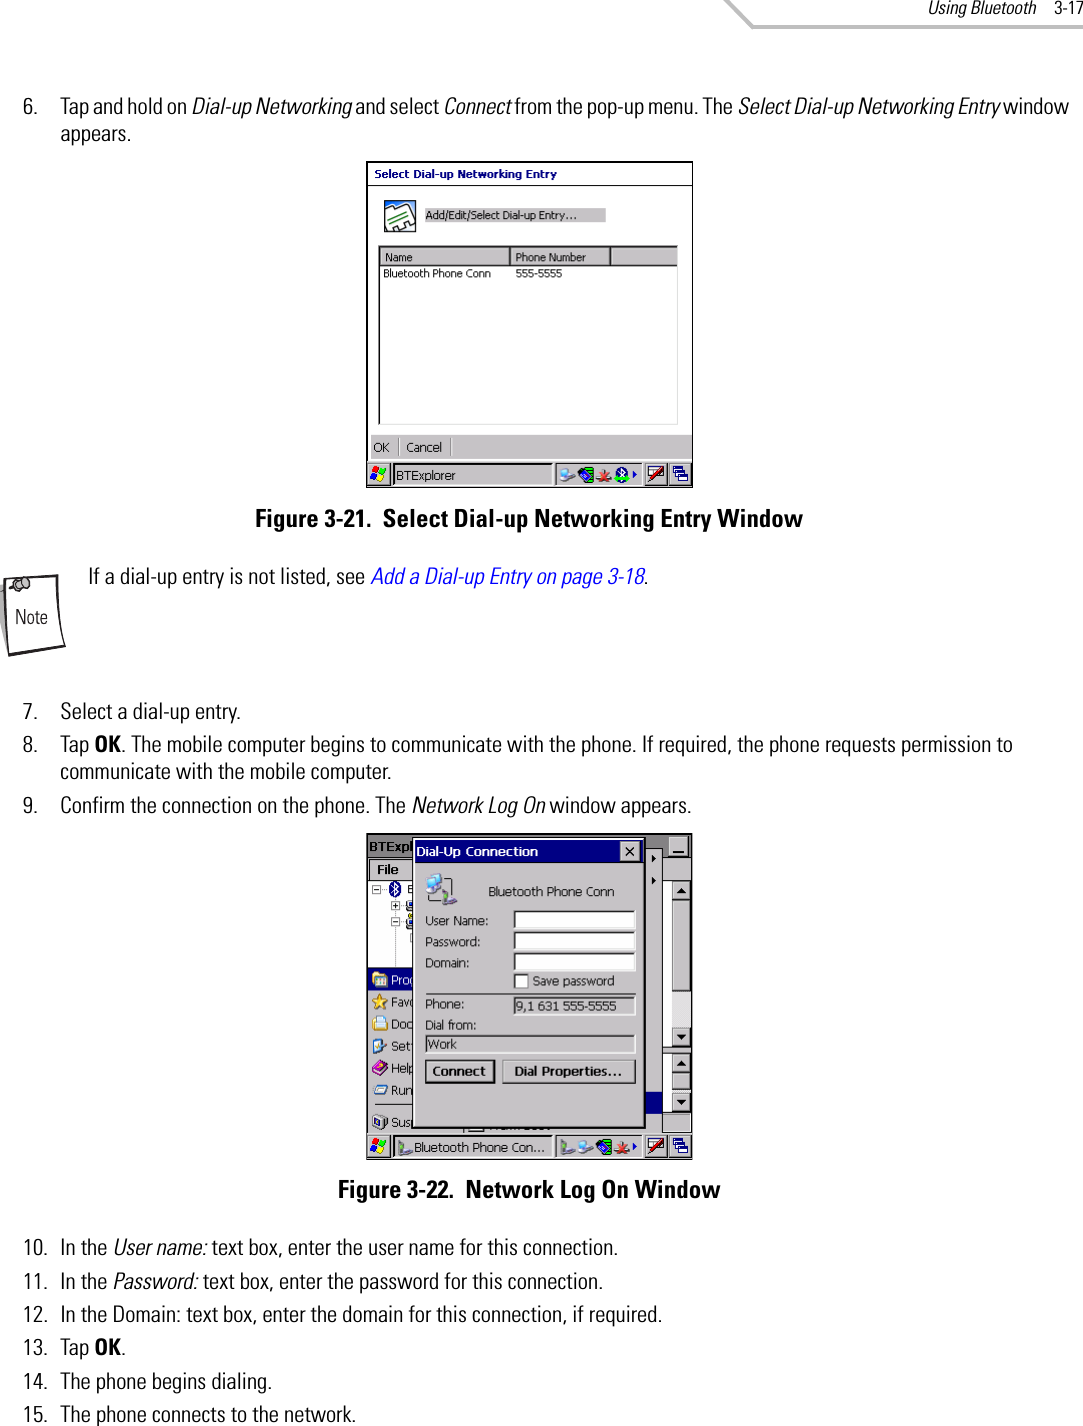 Using Bluetooth 3-176. Tap and hold on Dial-up Networking and select Connect from the pop-up menu. The Select Dial-up Networking Entry window appears.Figure 3-21.  Select Dial-up Networking Entry WindowIf a dial-up entry is not listed, see Add a Dial-up Entry on page 3-18.7. Select a dial-up entry.8. Tap OK. The mobile computer begins to communicate with the phone. If required, the phone requests permission to communicate with the mobile computer.9. Confirm the connection on the phone. The Network Log On window appears.Figure 3-22.  Network Log On Window10. In the User name: text box, enter the user name for this connection.11. In the Password: text box, enter the password for this connection.12. In the Domain: text box, enter the domain for this connection, if required.13. Tap OK.14. The phone begins dialing.15. The phone connects to the network.